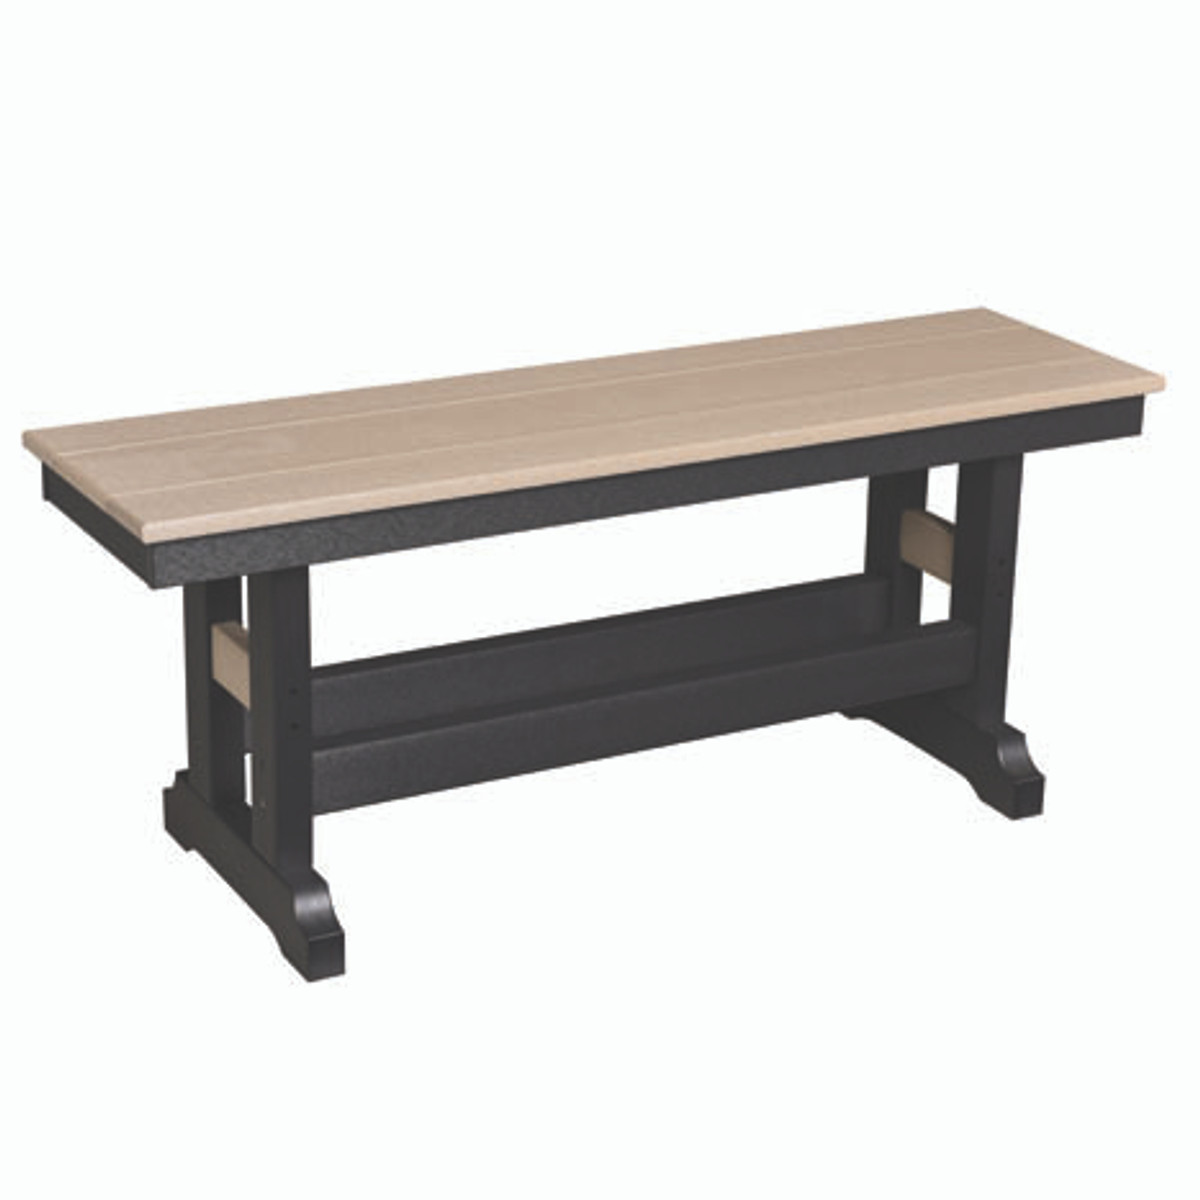 GARDEN CLASSIC BENCH 44" DINING BENCH (DINING HEIGHT)